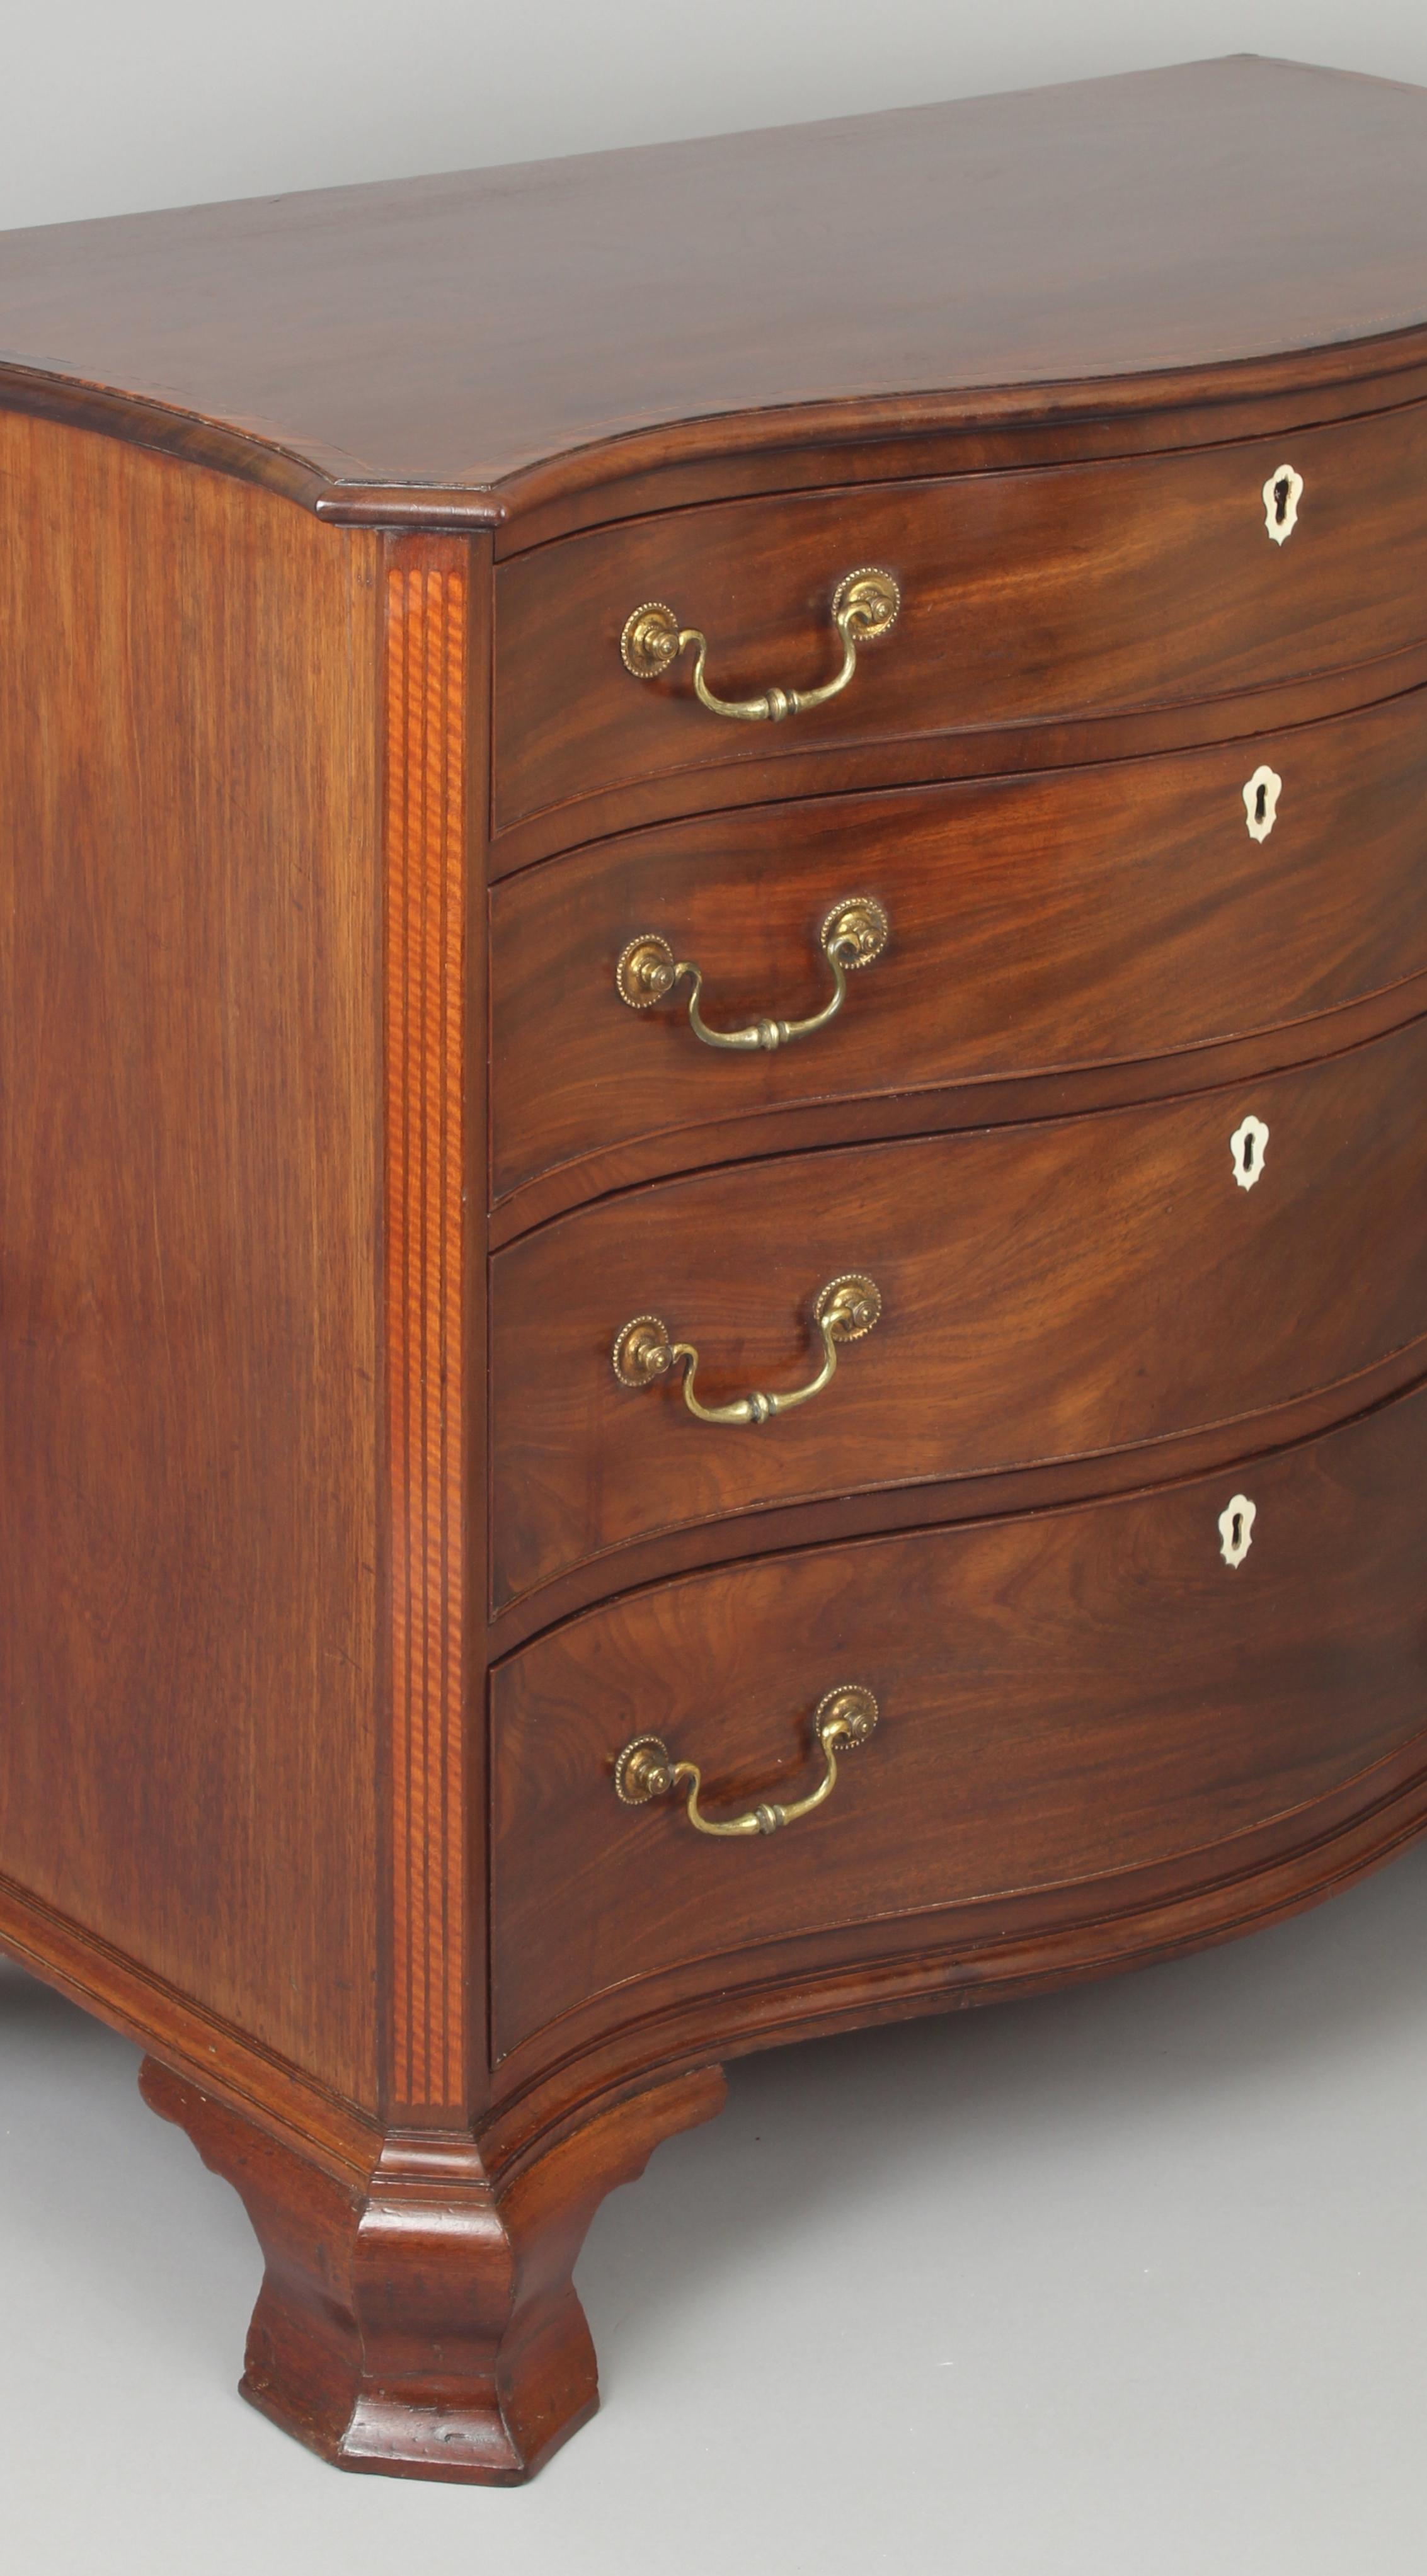 Fine George III Period Mahogany Serpentine Dressing-Chest of Small Proportions (George III.) im Angebot